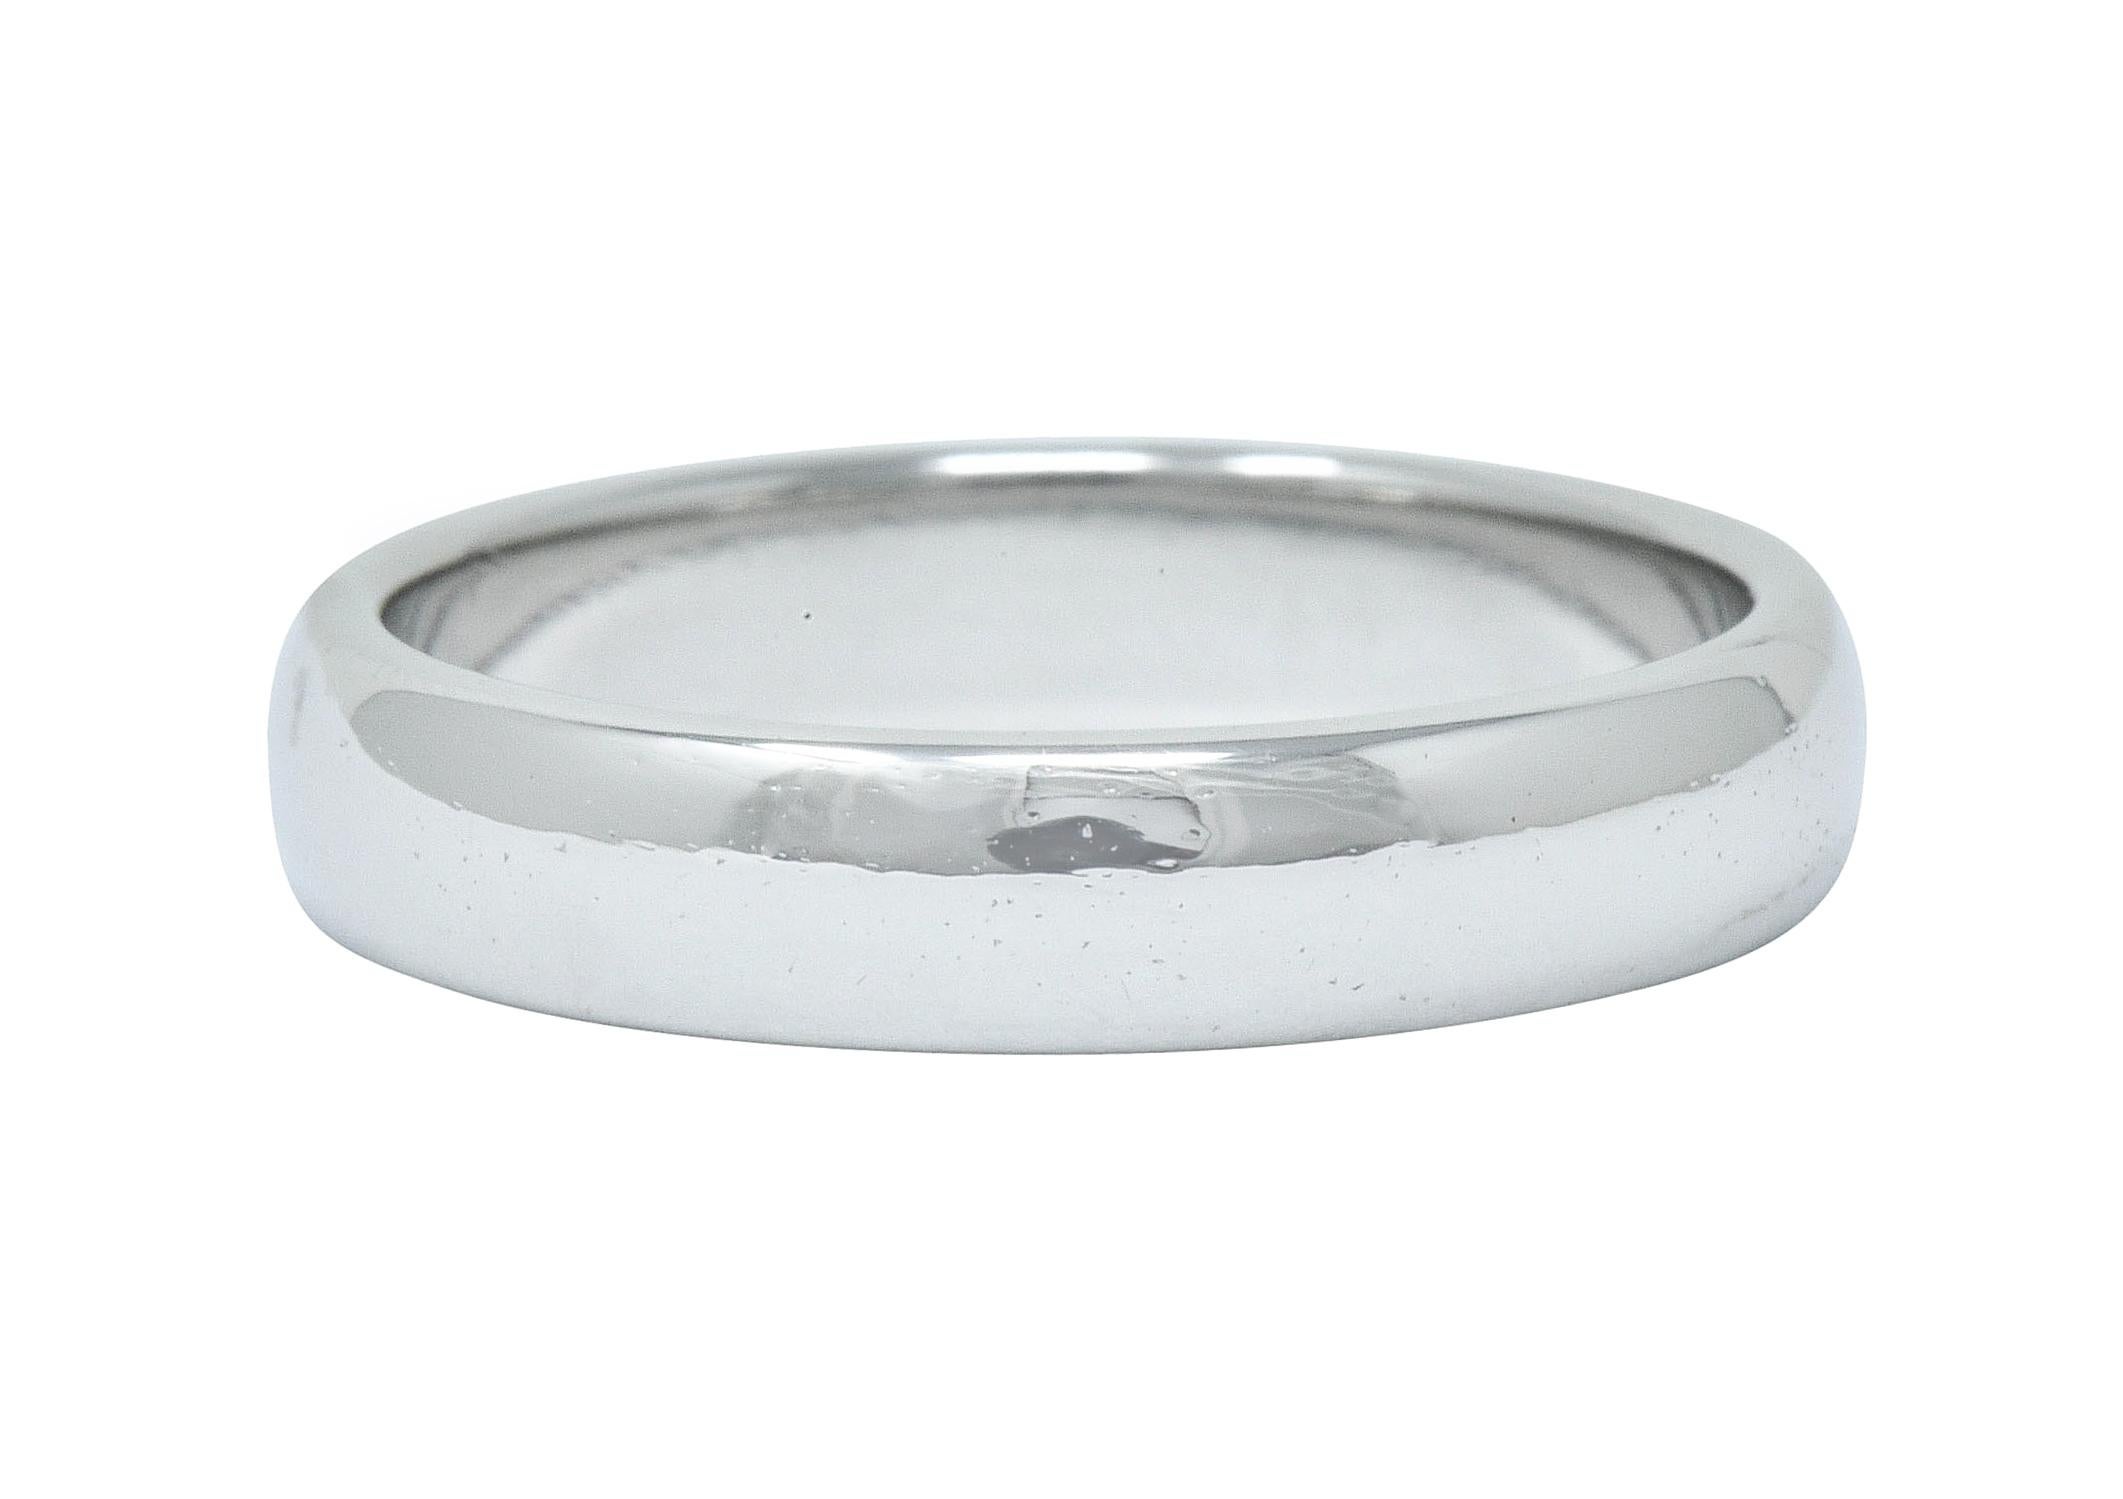 Wide band ring featuring a bright polished and rounded curvature

Fully signed 1999 Tiffany & Co.

Stamped PT950 platinum

Ring Size: 8 3/4 & sizable

Measures: 4.5 mm wide and sits 1.8 mm high

Total weight: 9.5 grams

Classic. Smooth.